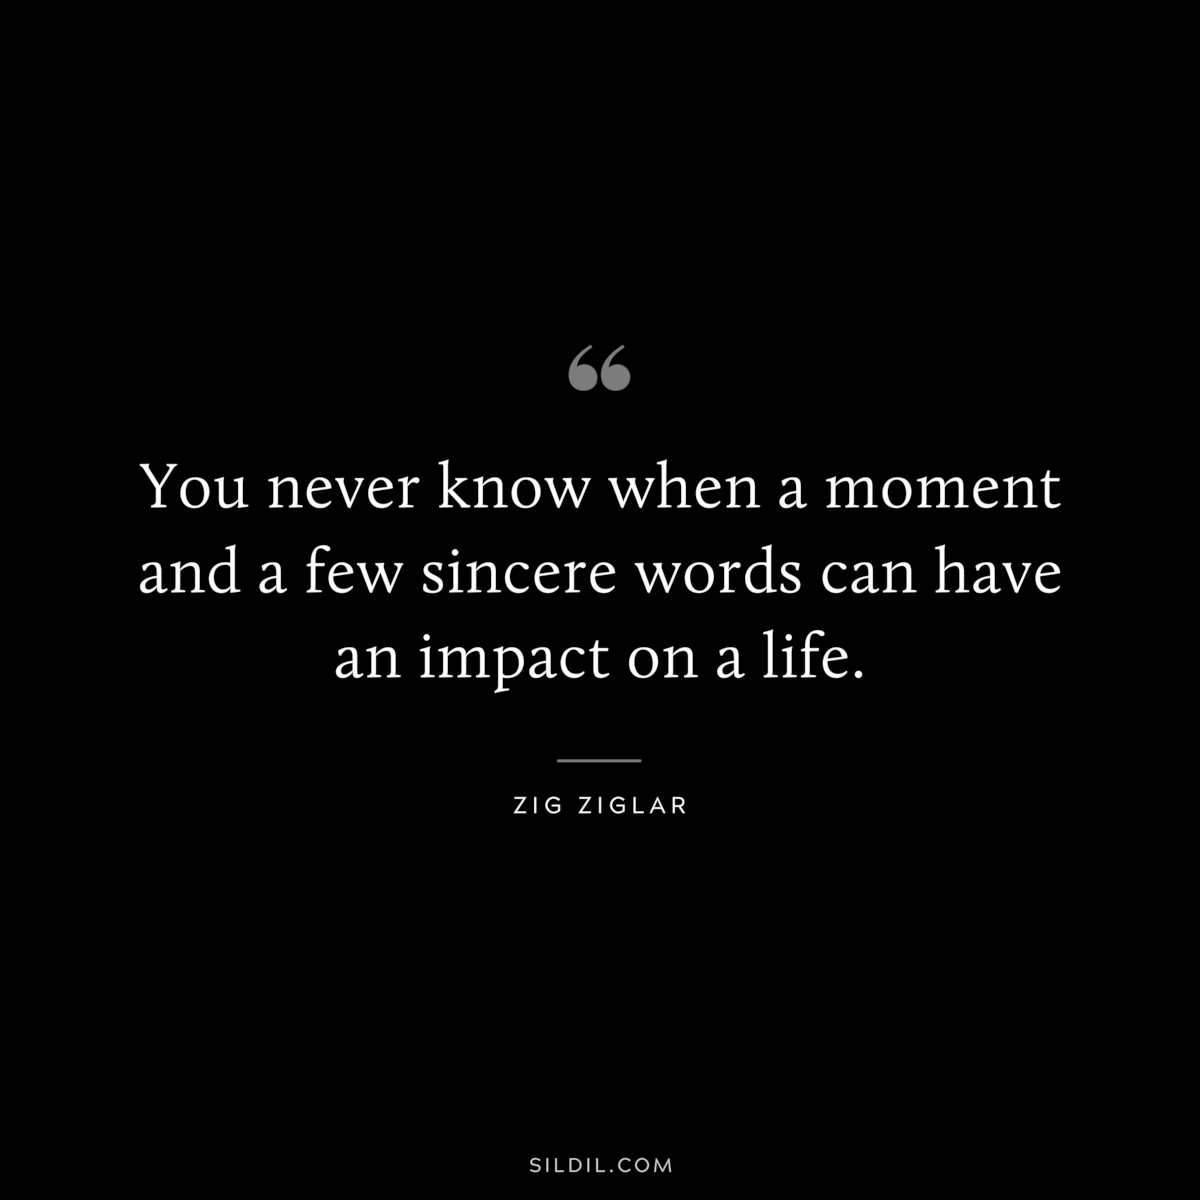 You never know when a moment and a few sincere words can have an impact on a life. ― Zig Ziglar